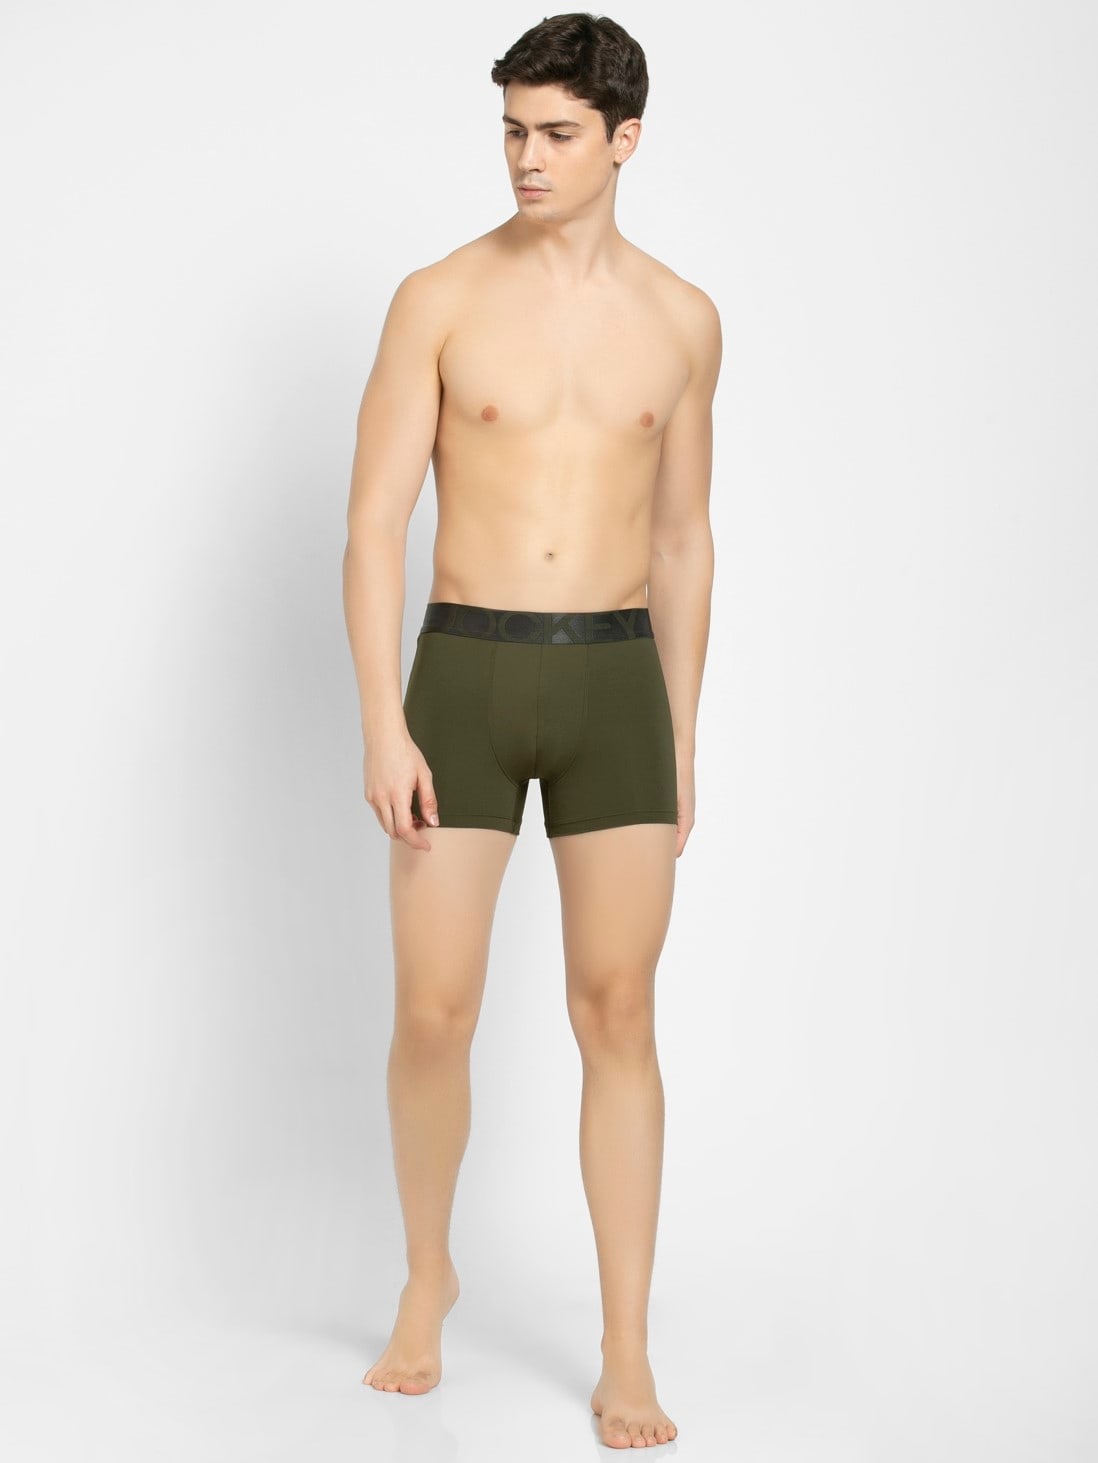 Forest Night Ultra Soft Tactel Nylon Mens Trunks With Double Layer Contoured Pouch For Men Ic28